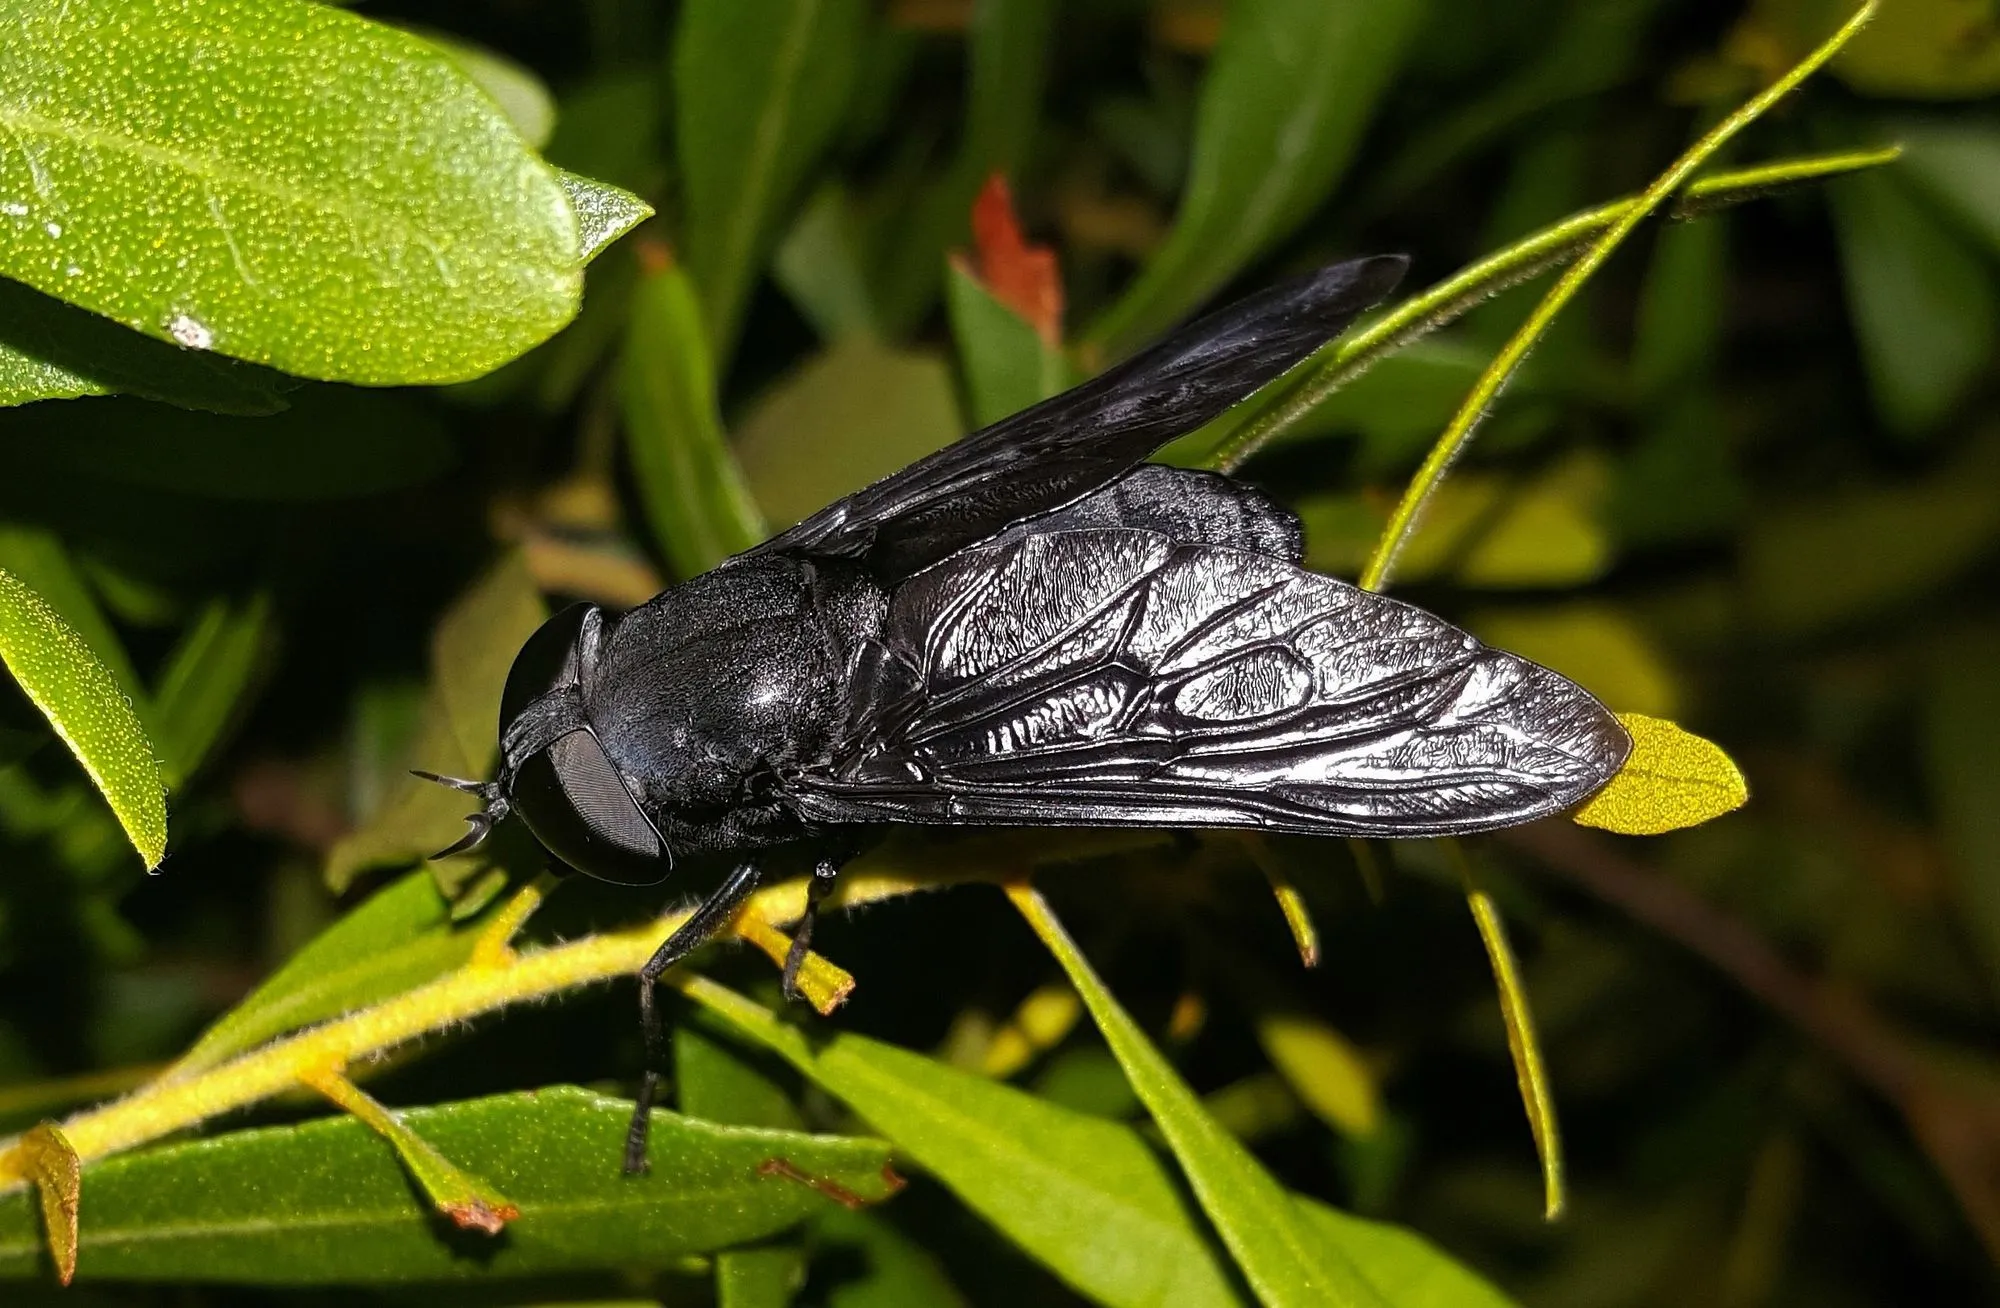 The blood-drinking horse-fly has a siphon that allows them to breathe in water.